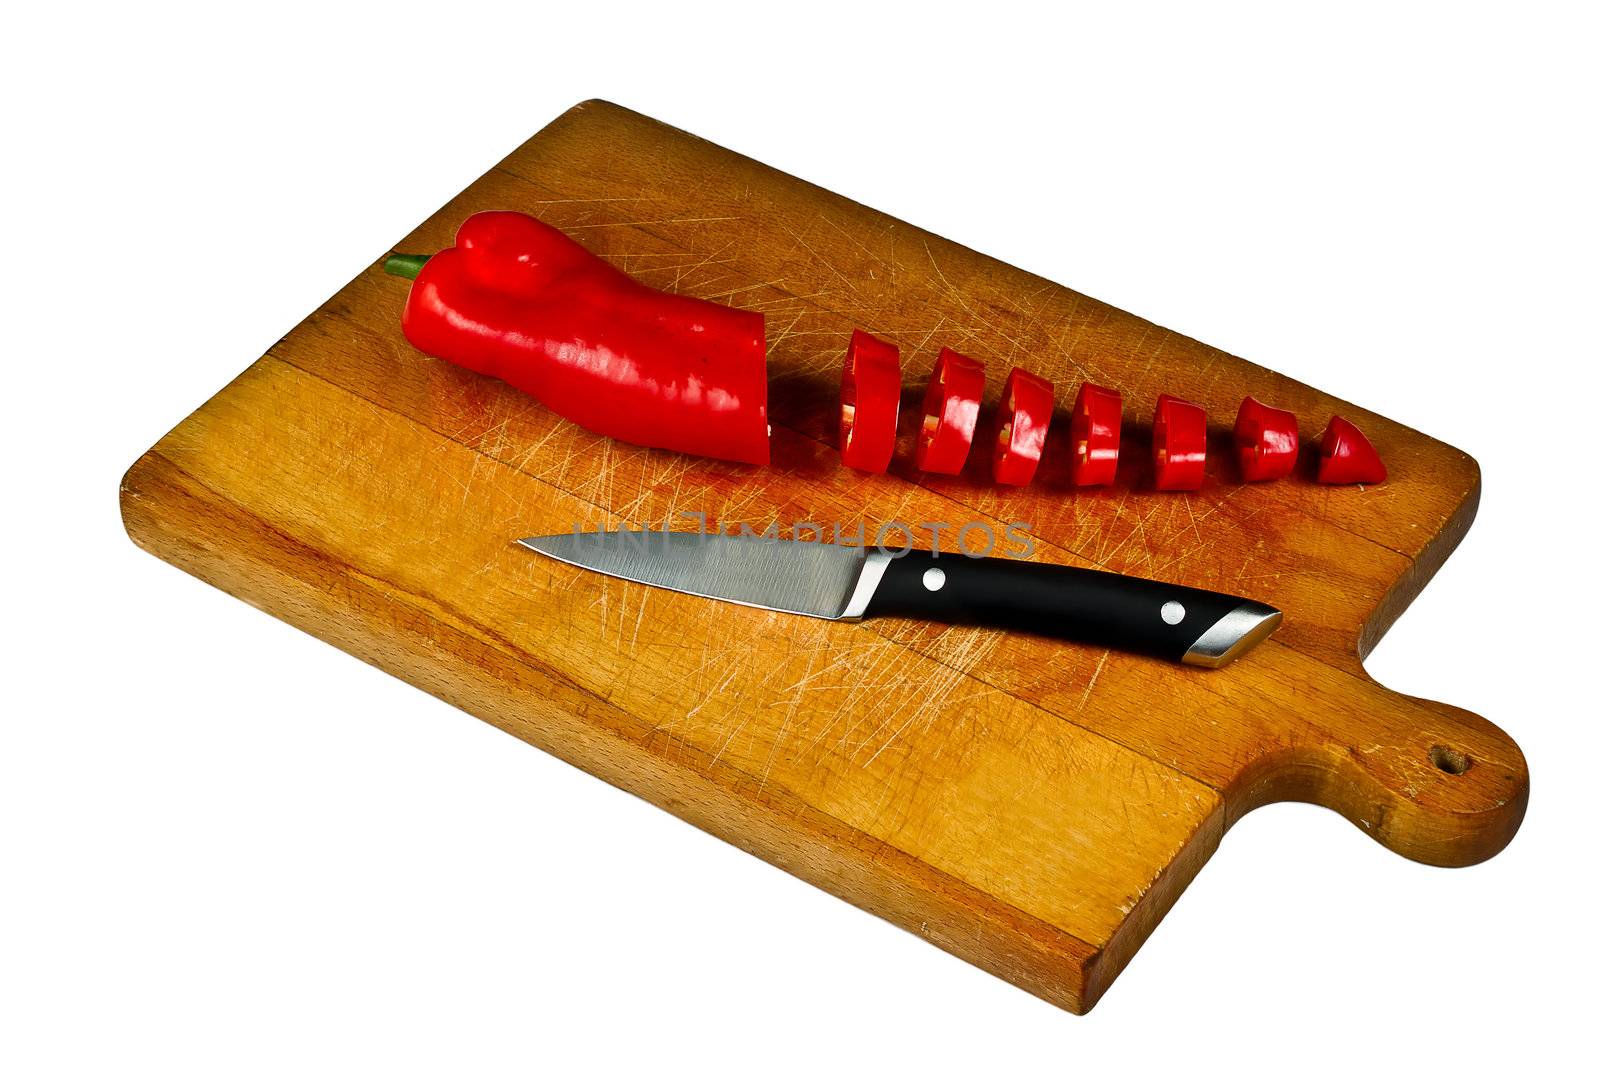 Sliced Pepper and knife on chopping board by lavsen